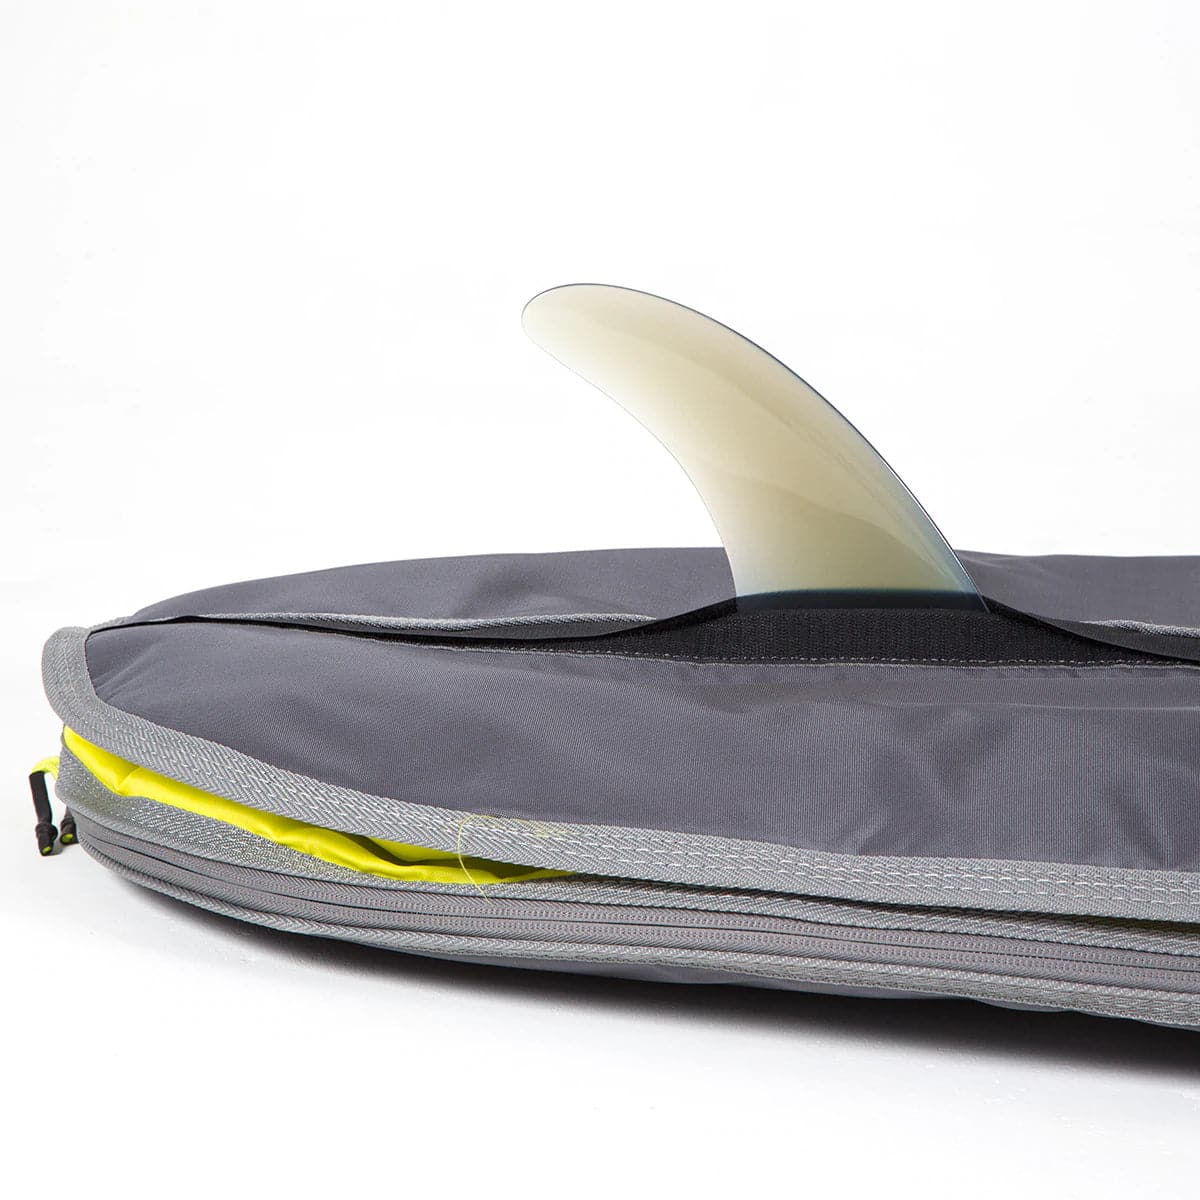 Featuring the SUP Dayrunner Bag 10'6 sup accessory, sup fin manufactured by FCS shown here from a fourth angle.